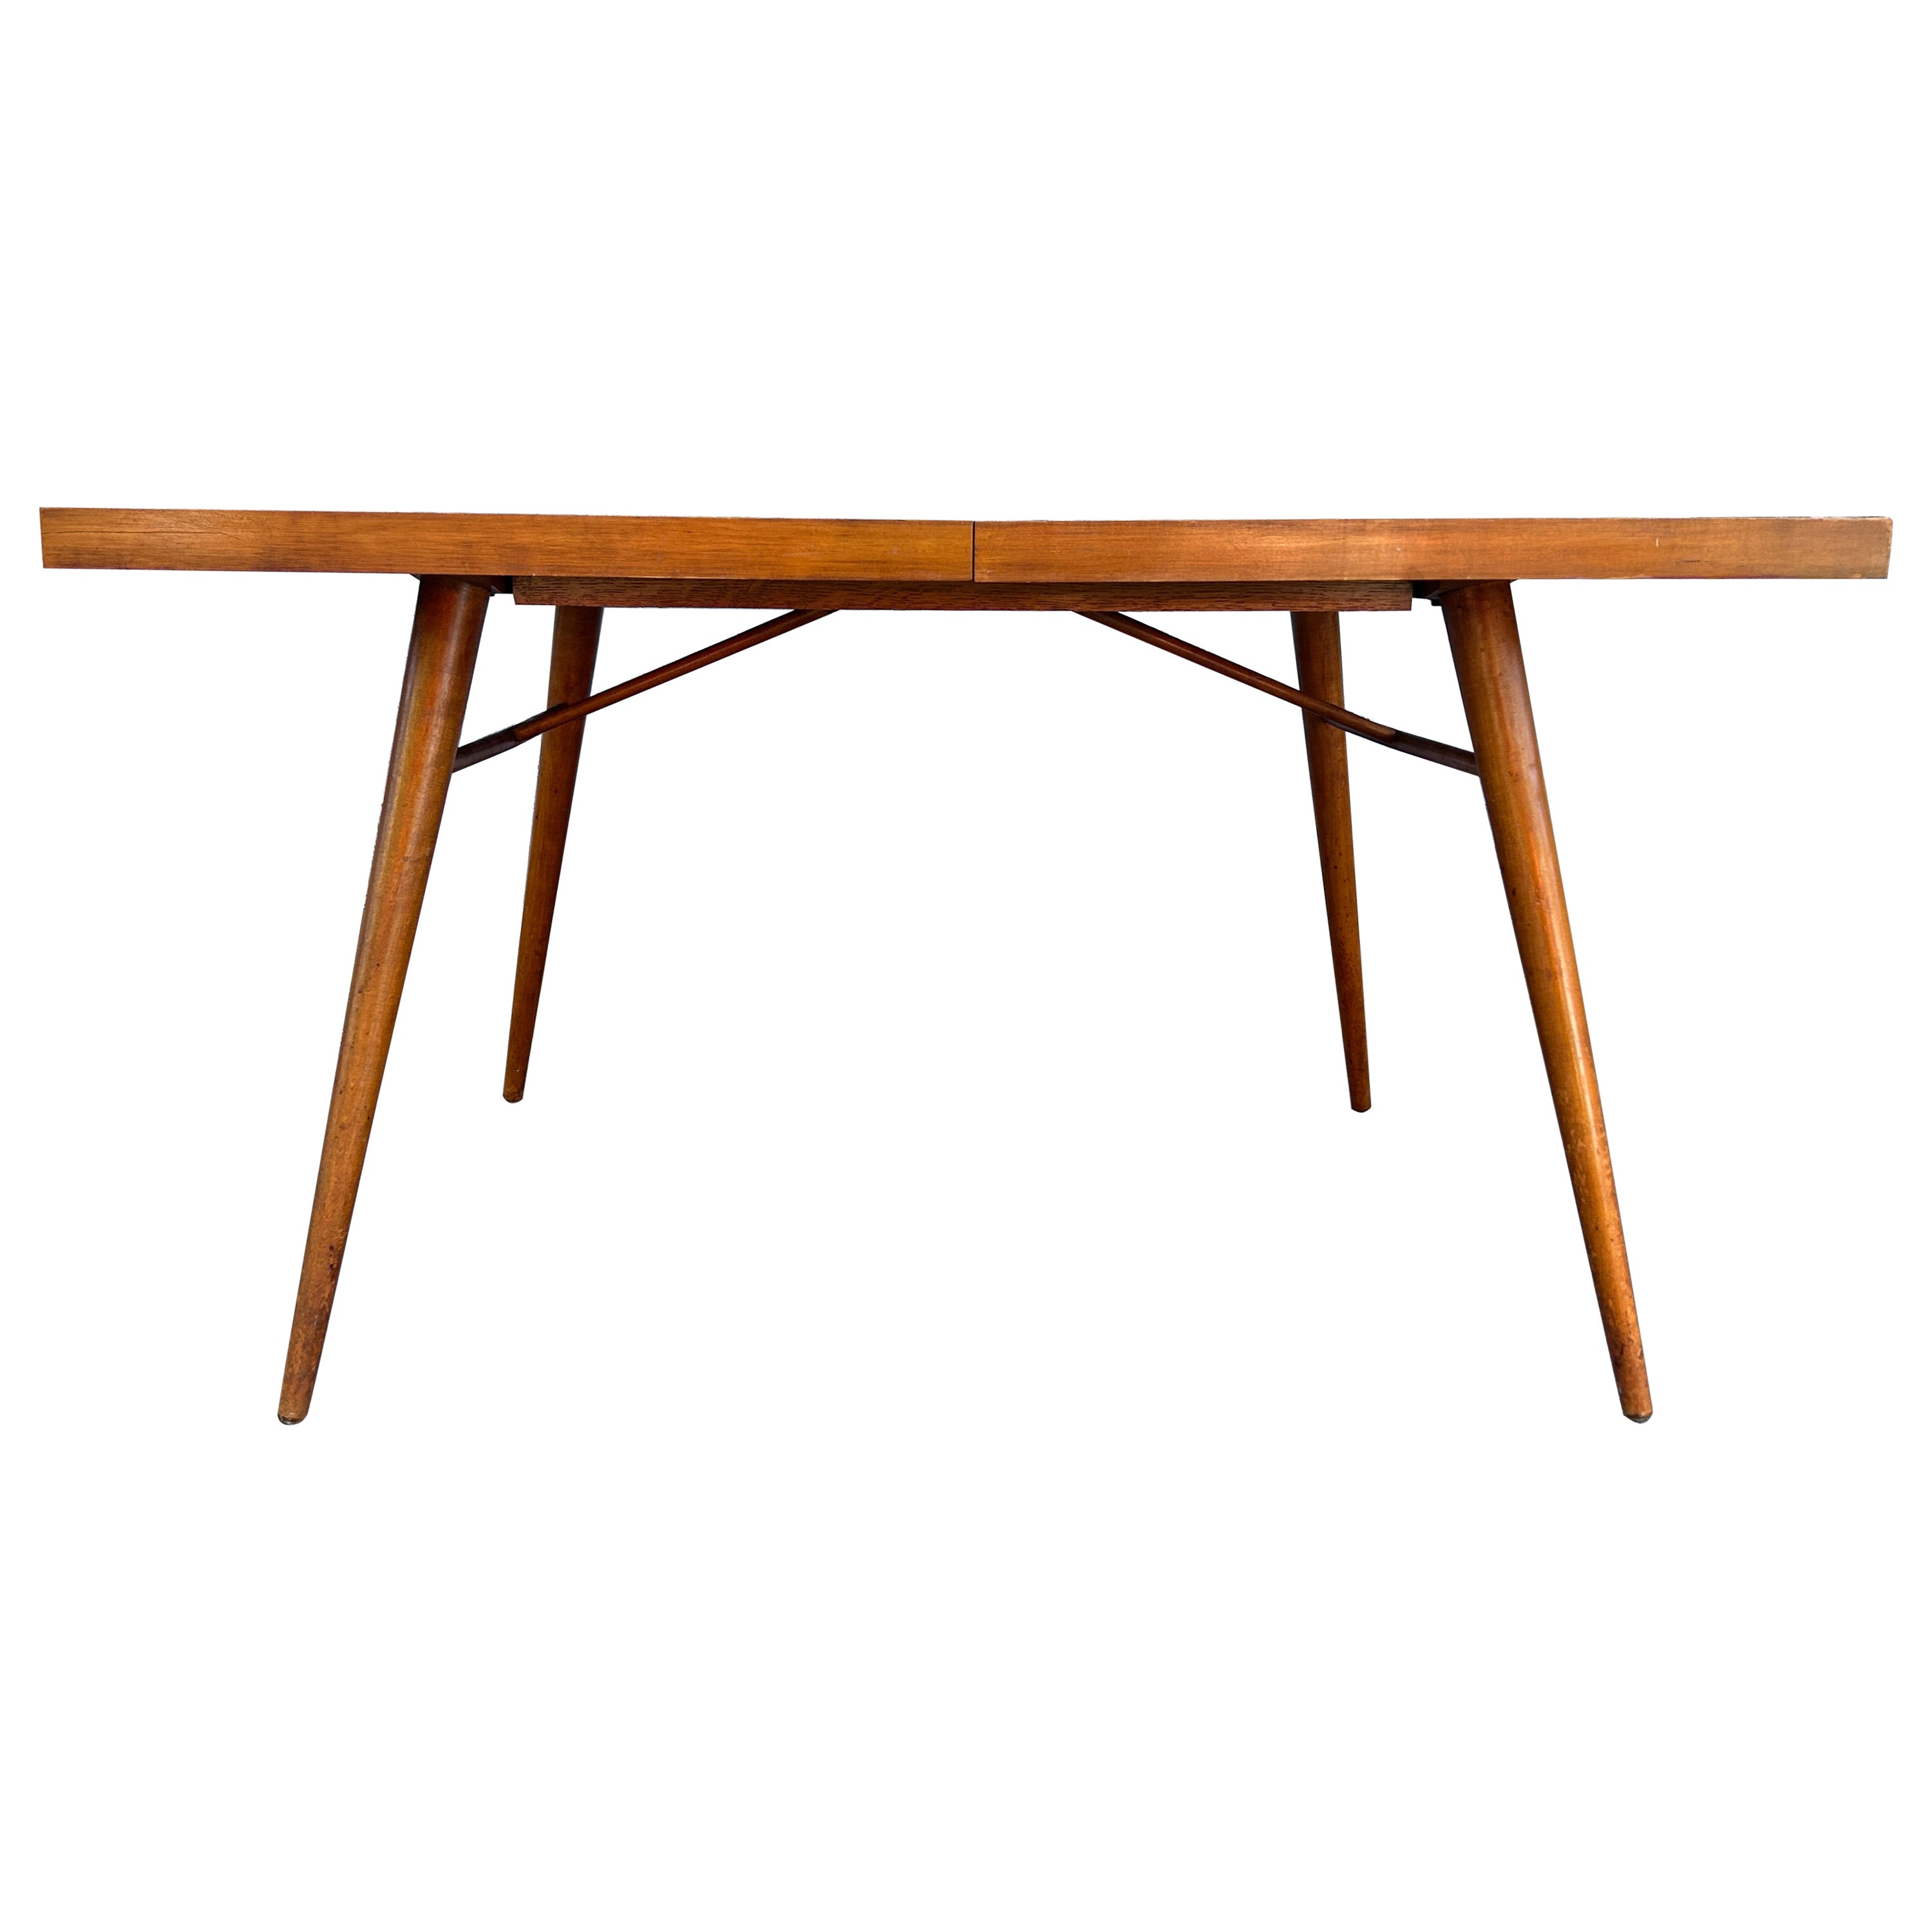 Midcentury Paul McCobb Planner Group rectangle Maple #1522 Dining Table 2 leaves For Sale